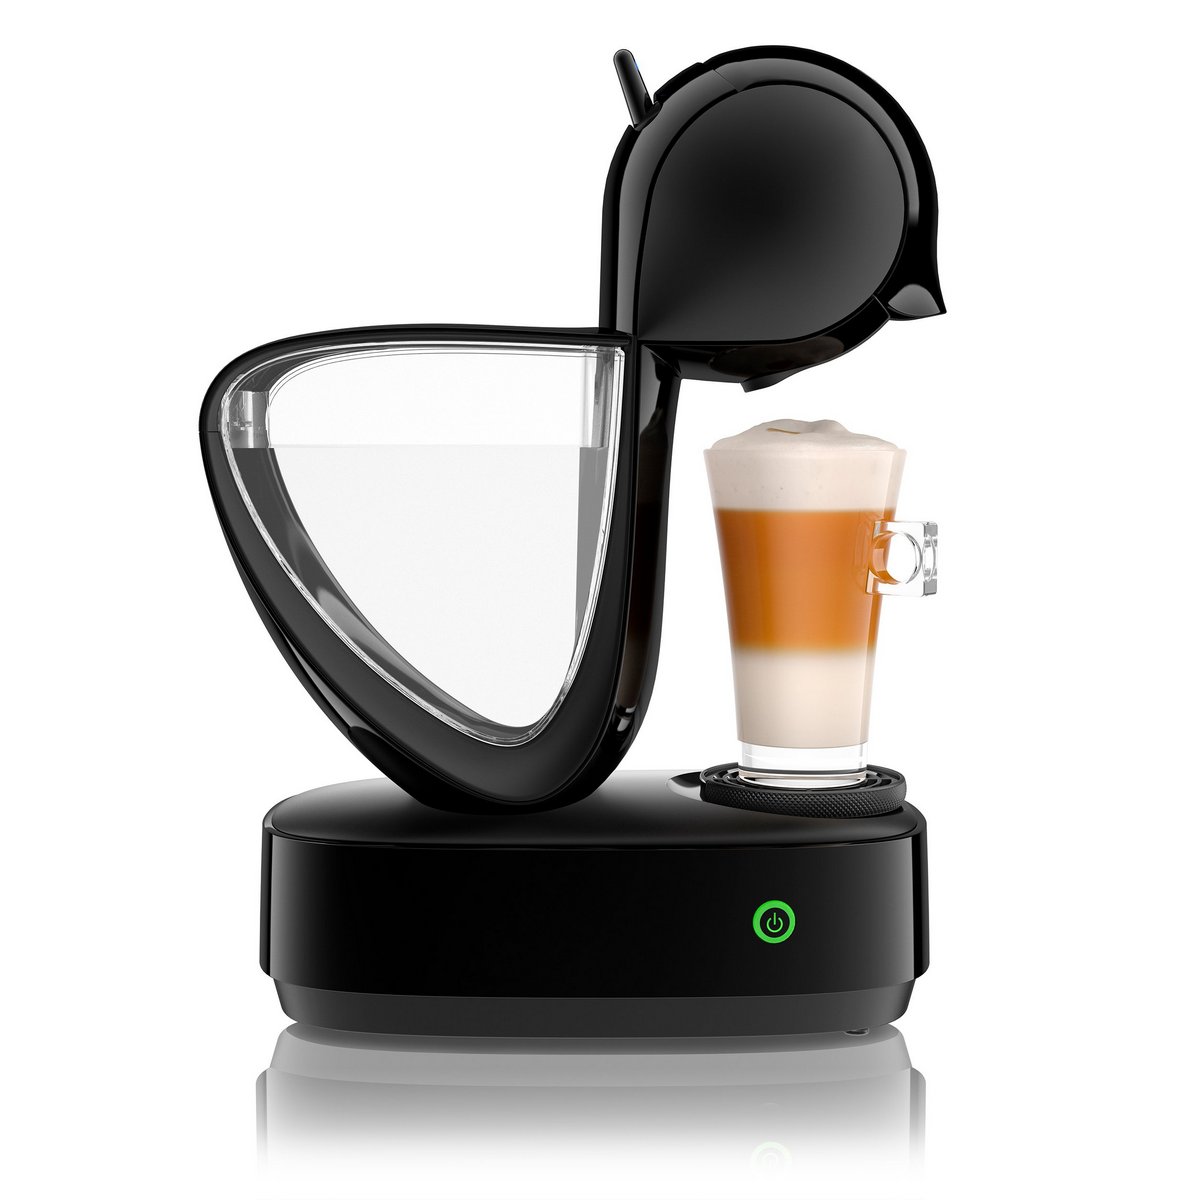 KRUPS NESCAFE DOLCE GUSTO INFINISSIMA KP 170831 CIERNY + darček NESCAFE DOLCE GUSTO RISTRETTO BARISTA 48KS ECONOMY PACK